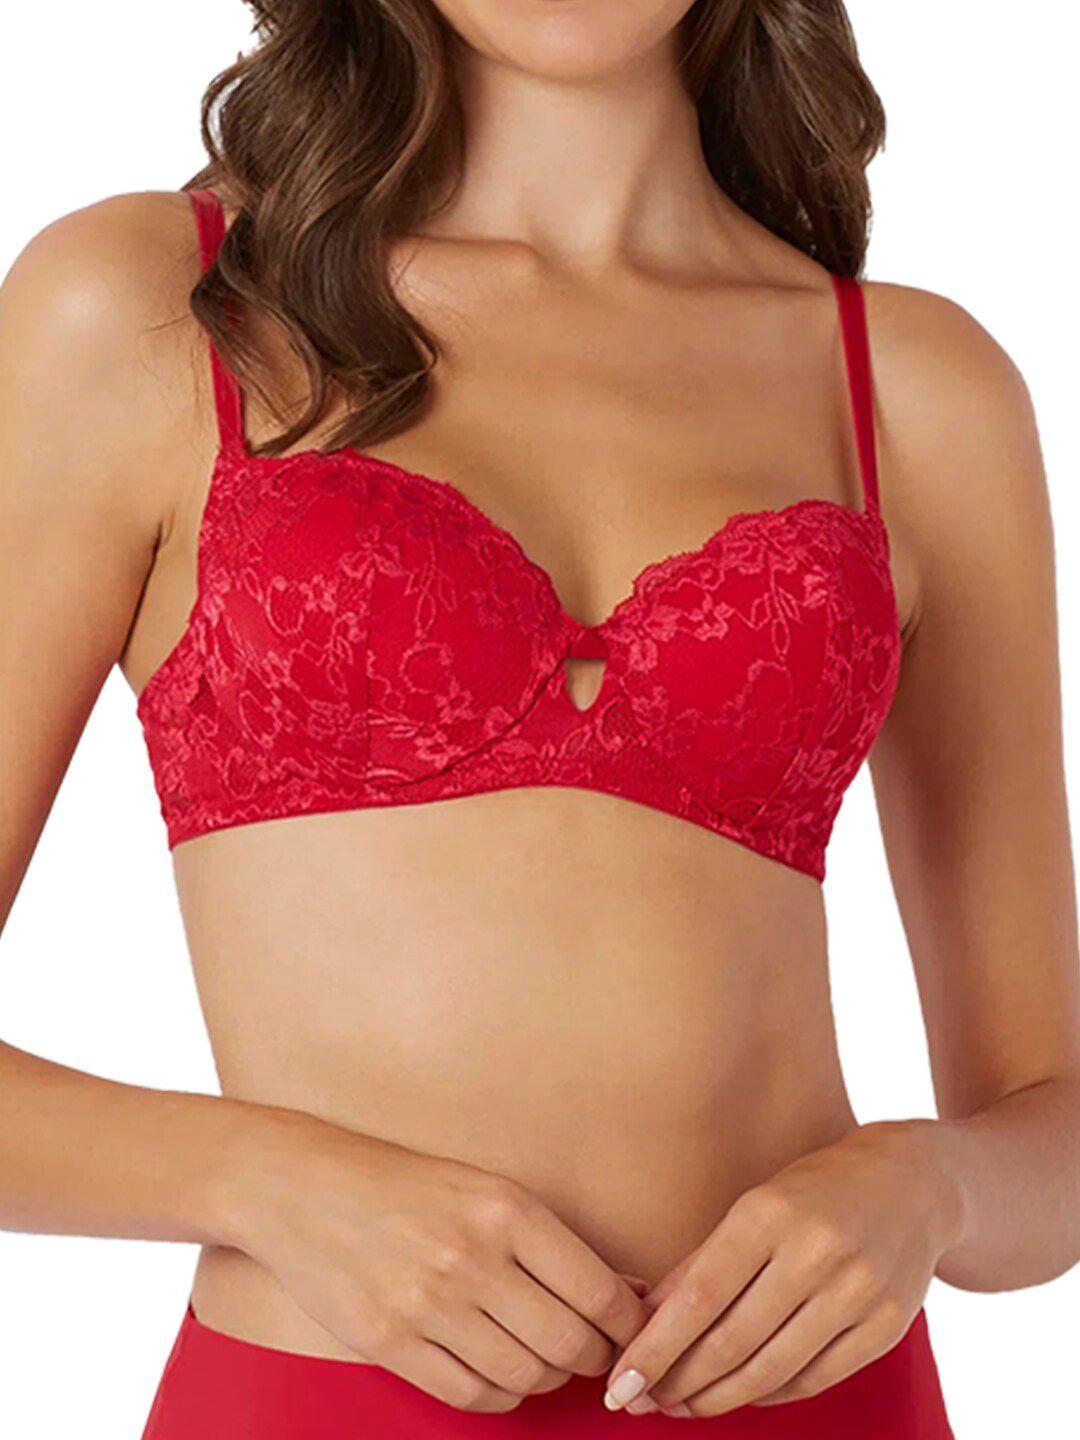 yamamay-floral-lace-underwired-non-padded-full-coverage-360-degree-support-push-up-bra